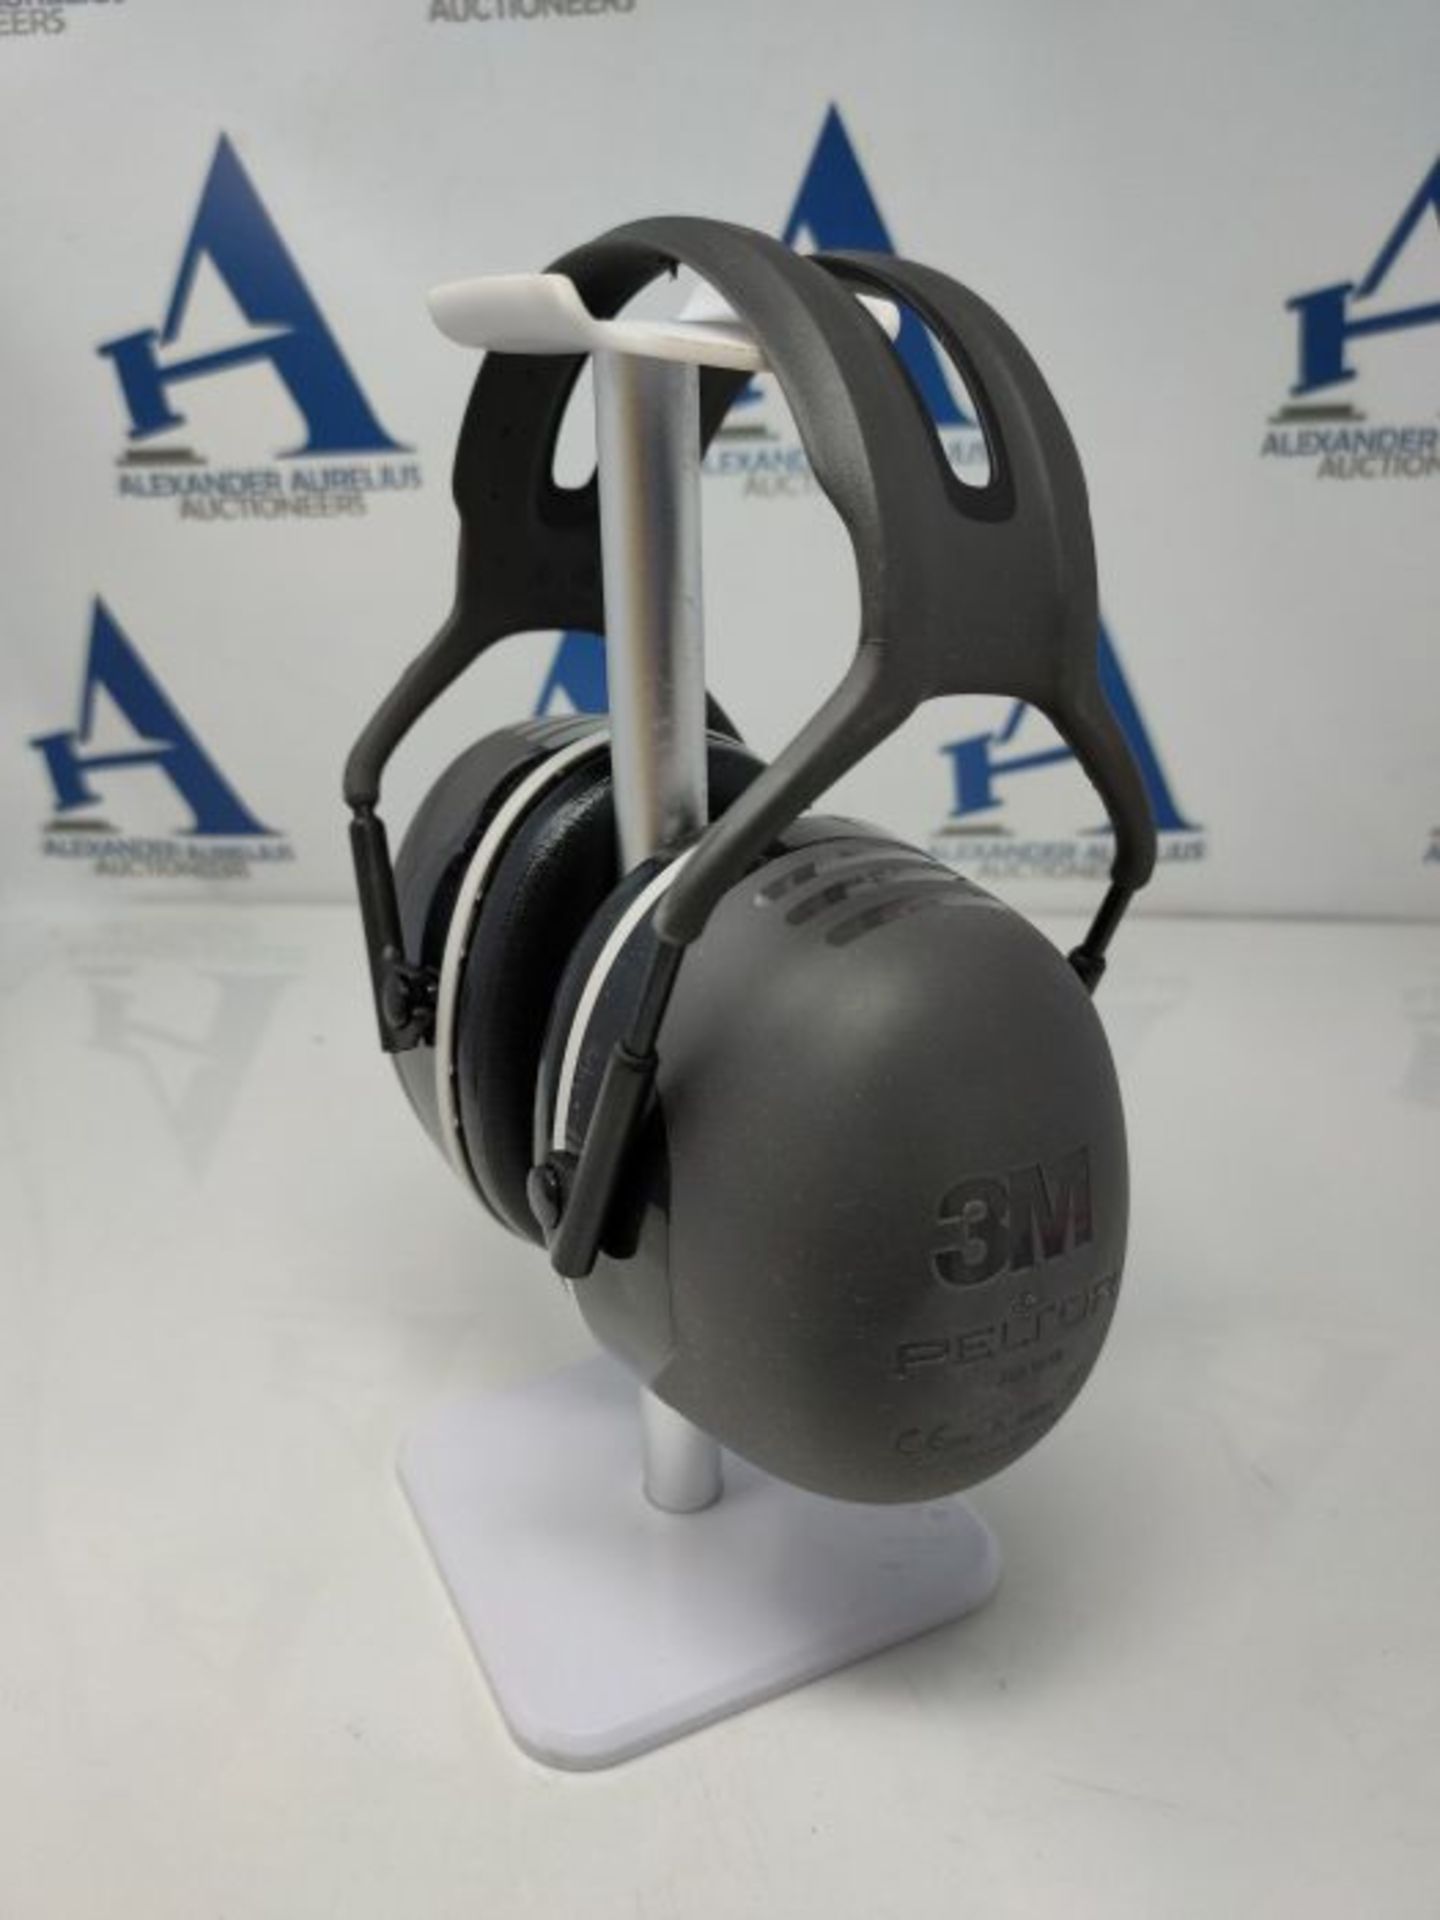 3M Peltor X5A Ear Defenders with Headband, Earmuffs for Reliable Hearing Protection Ag - Image 3 of 3